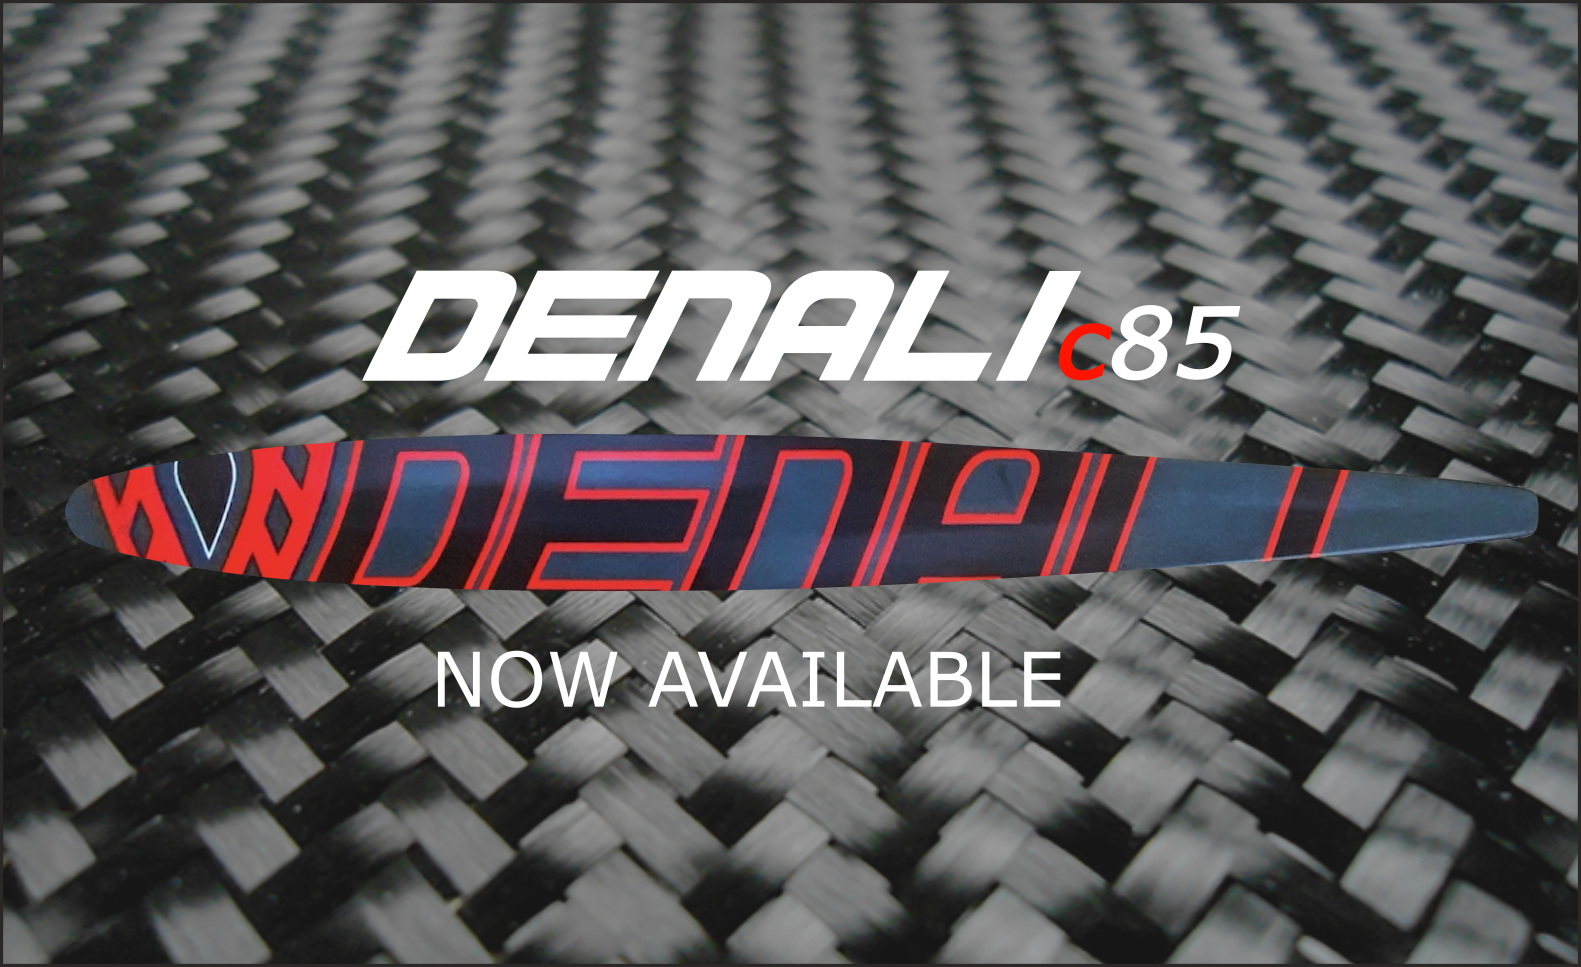 Introducing the all new Denali c85